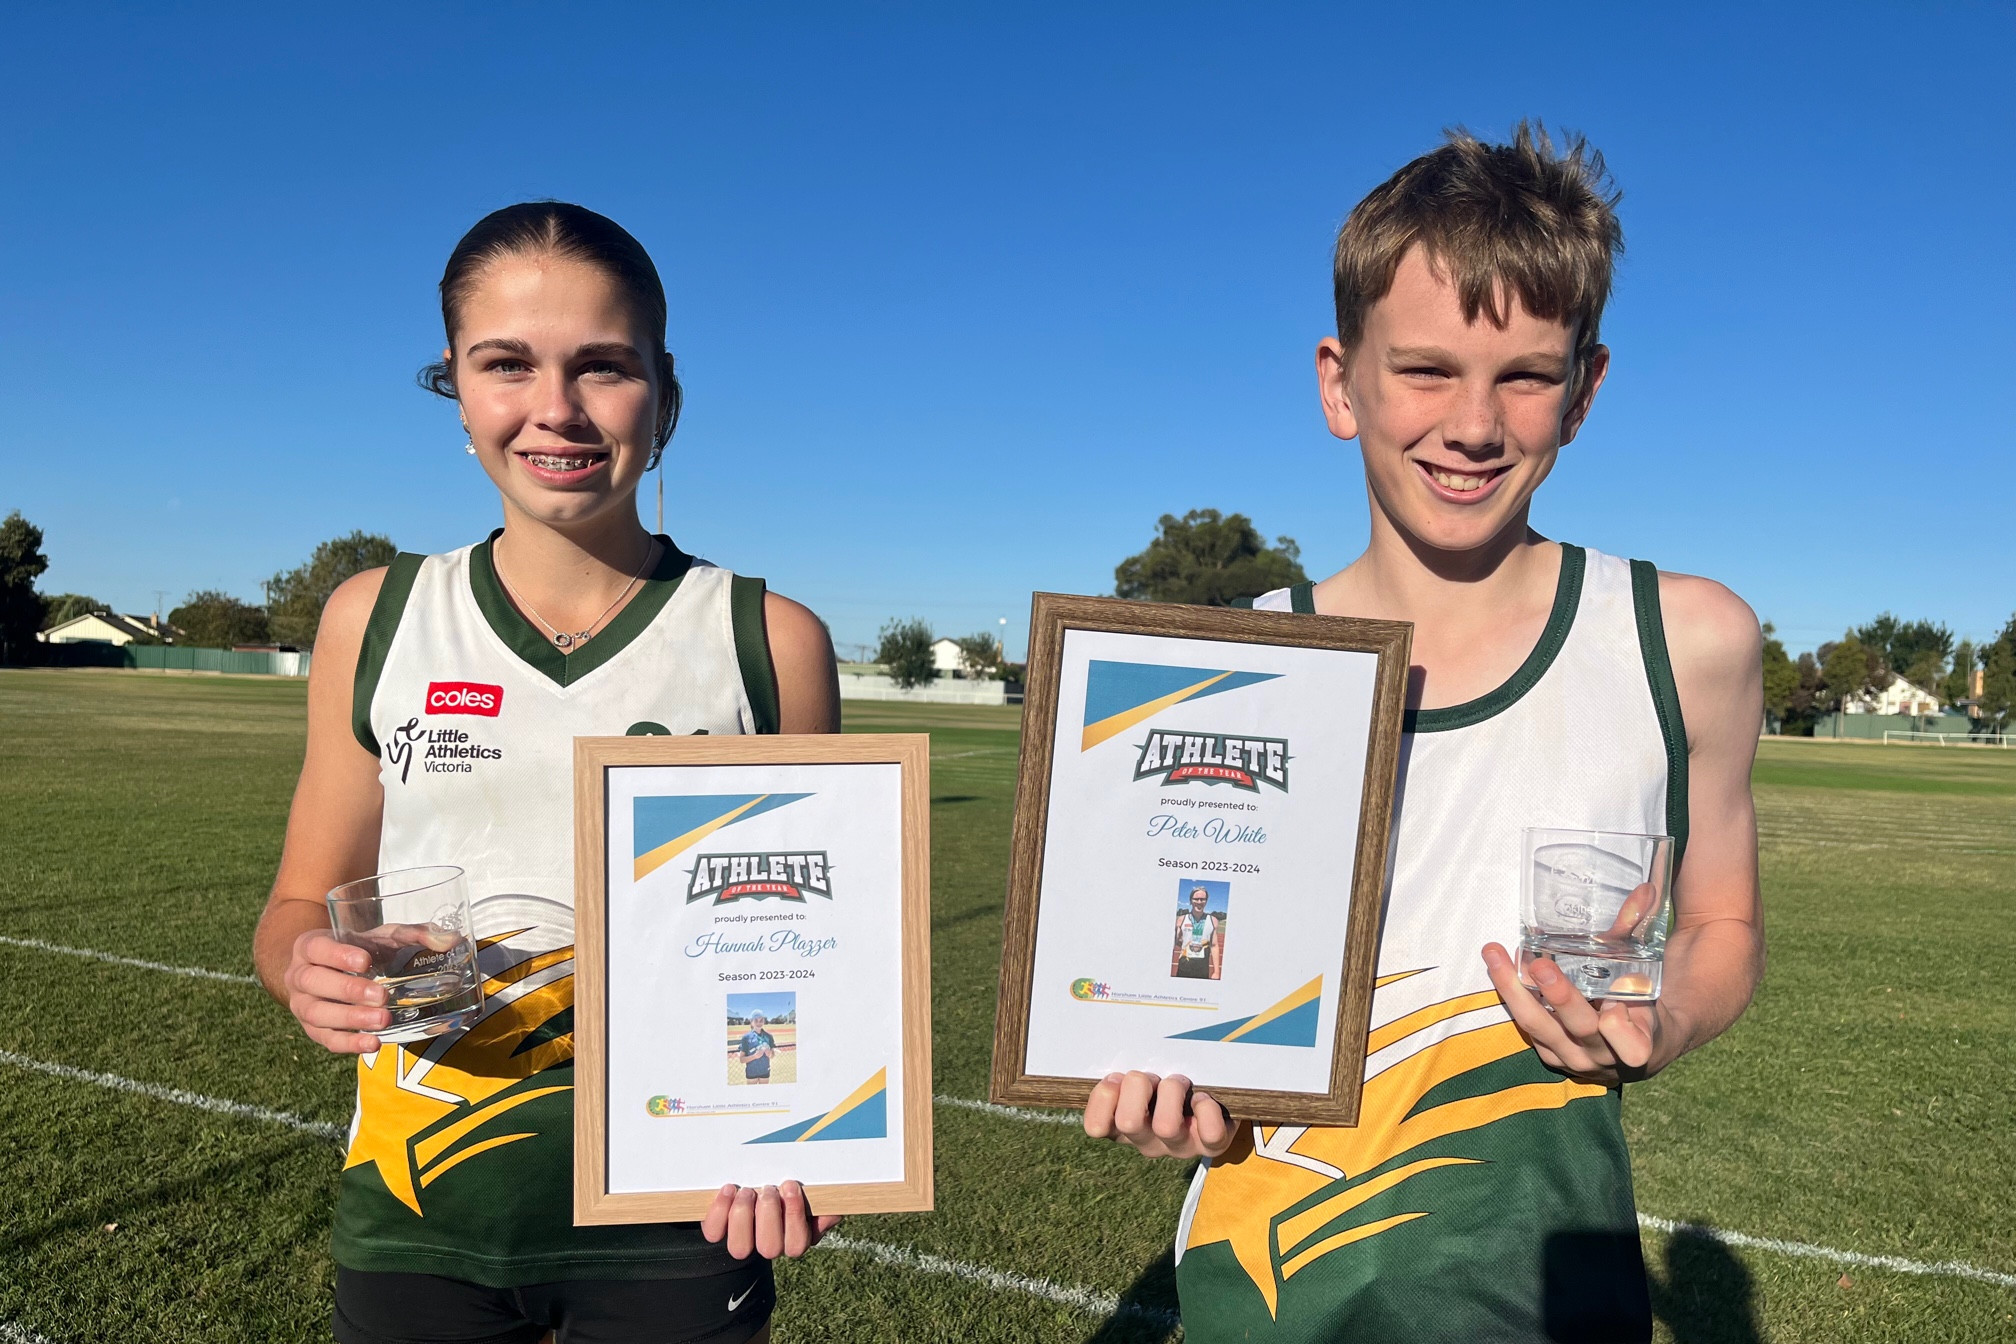 Left: Hannah Plazzer U15 Athlete of the Year. Right: Luke White accepting the award for his brother Peter White who was named U17 Athlete of the Year.